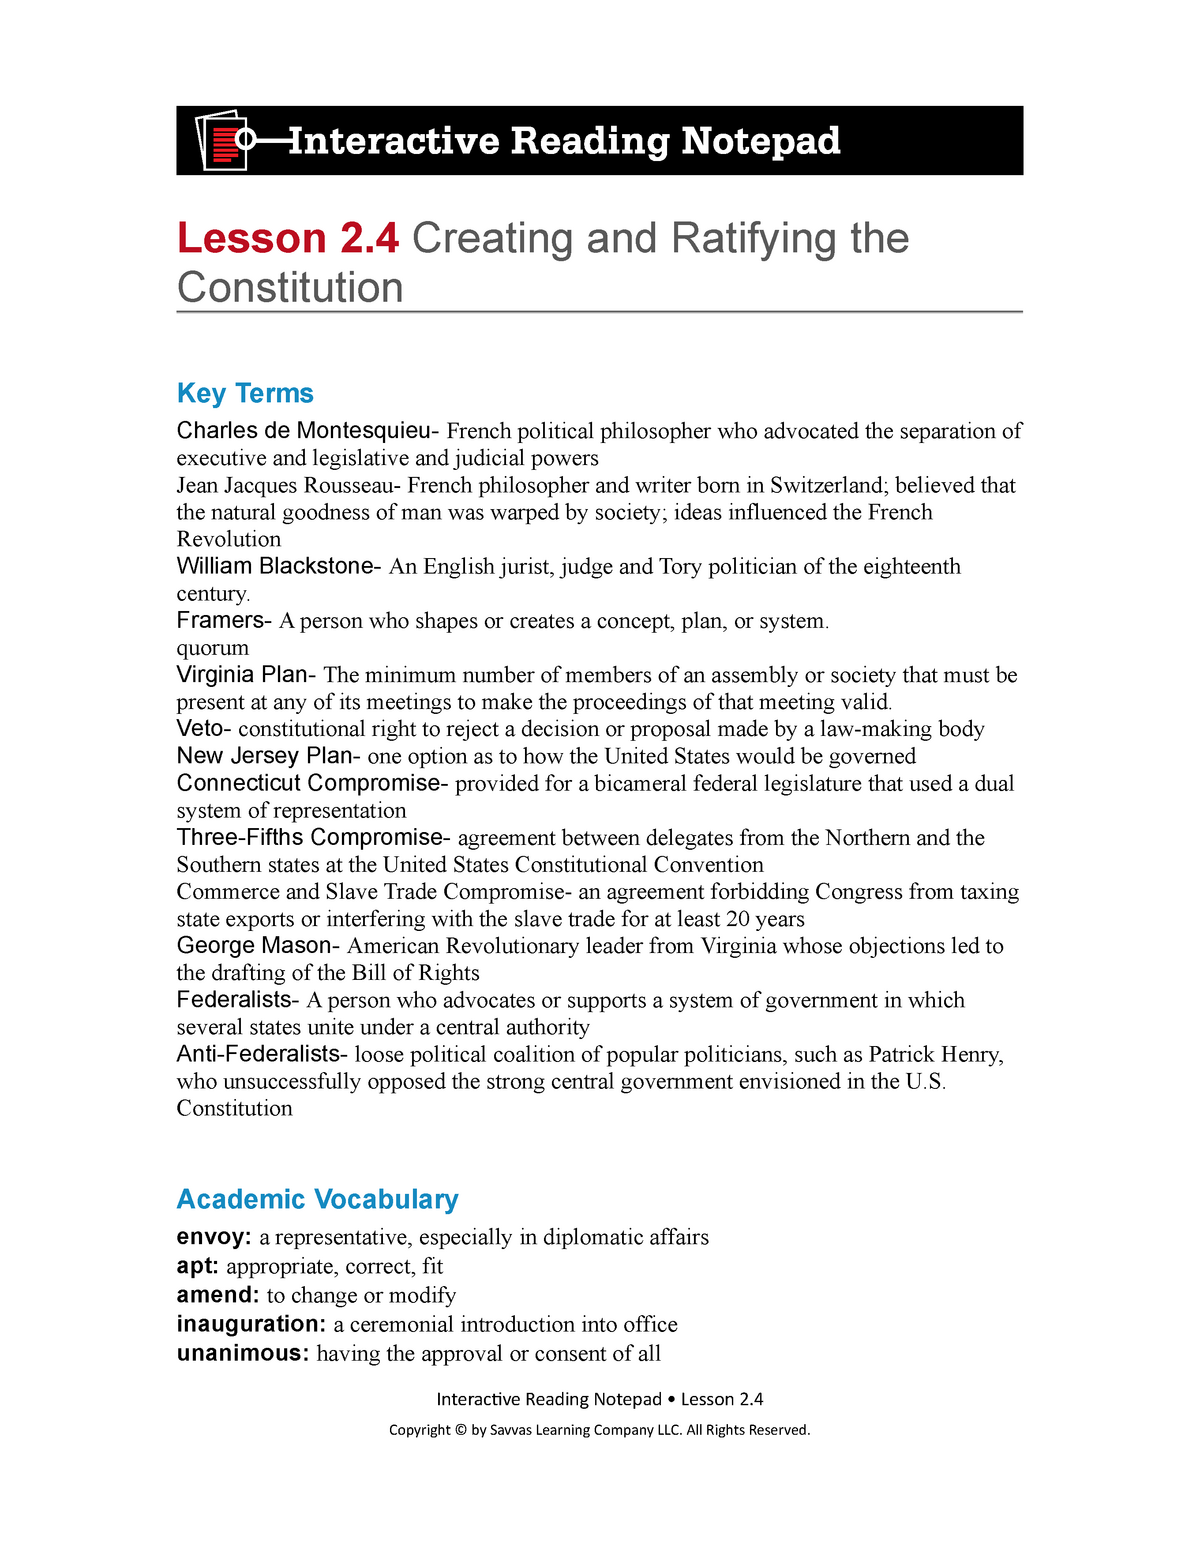 200 - For the download - Lesson 200 Creating and Ratifying the In Ratifying The Constitution Worksheet Answers